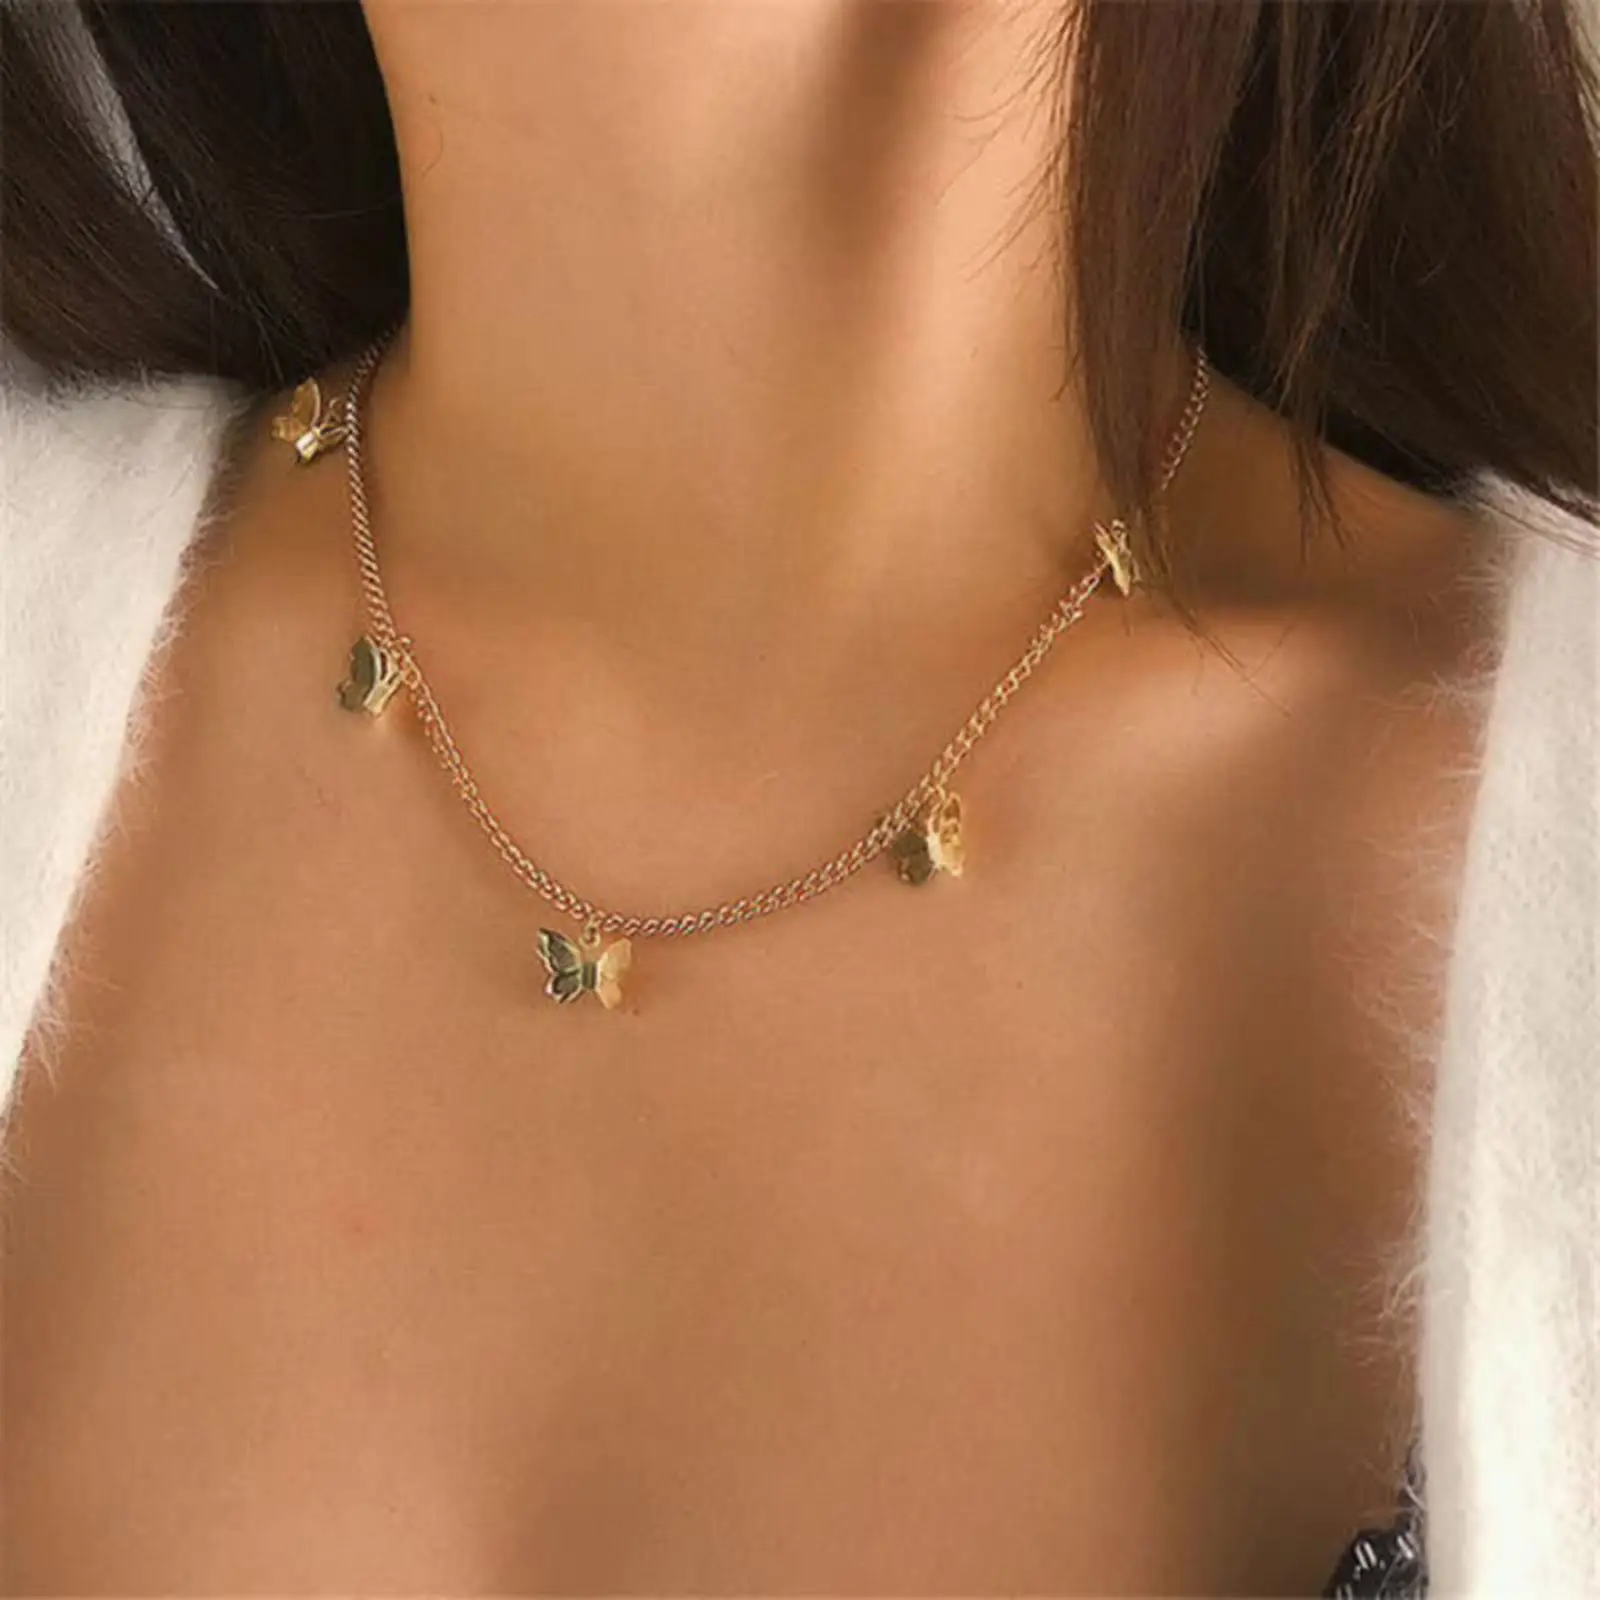 Natural Minimalist Strong Clavicle Necklace Girls Women Retro Wedding Anniversary Gifts Party